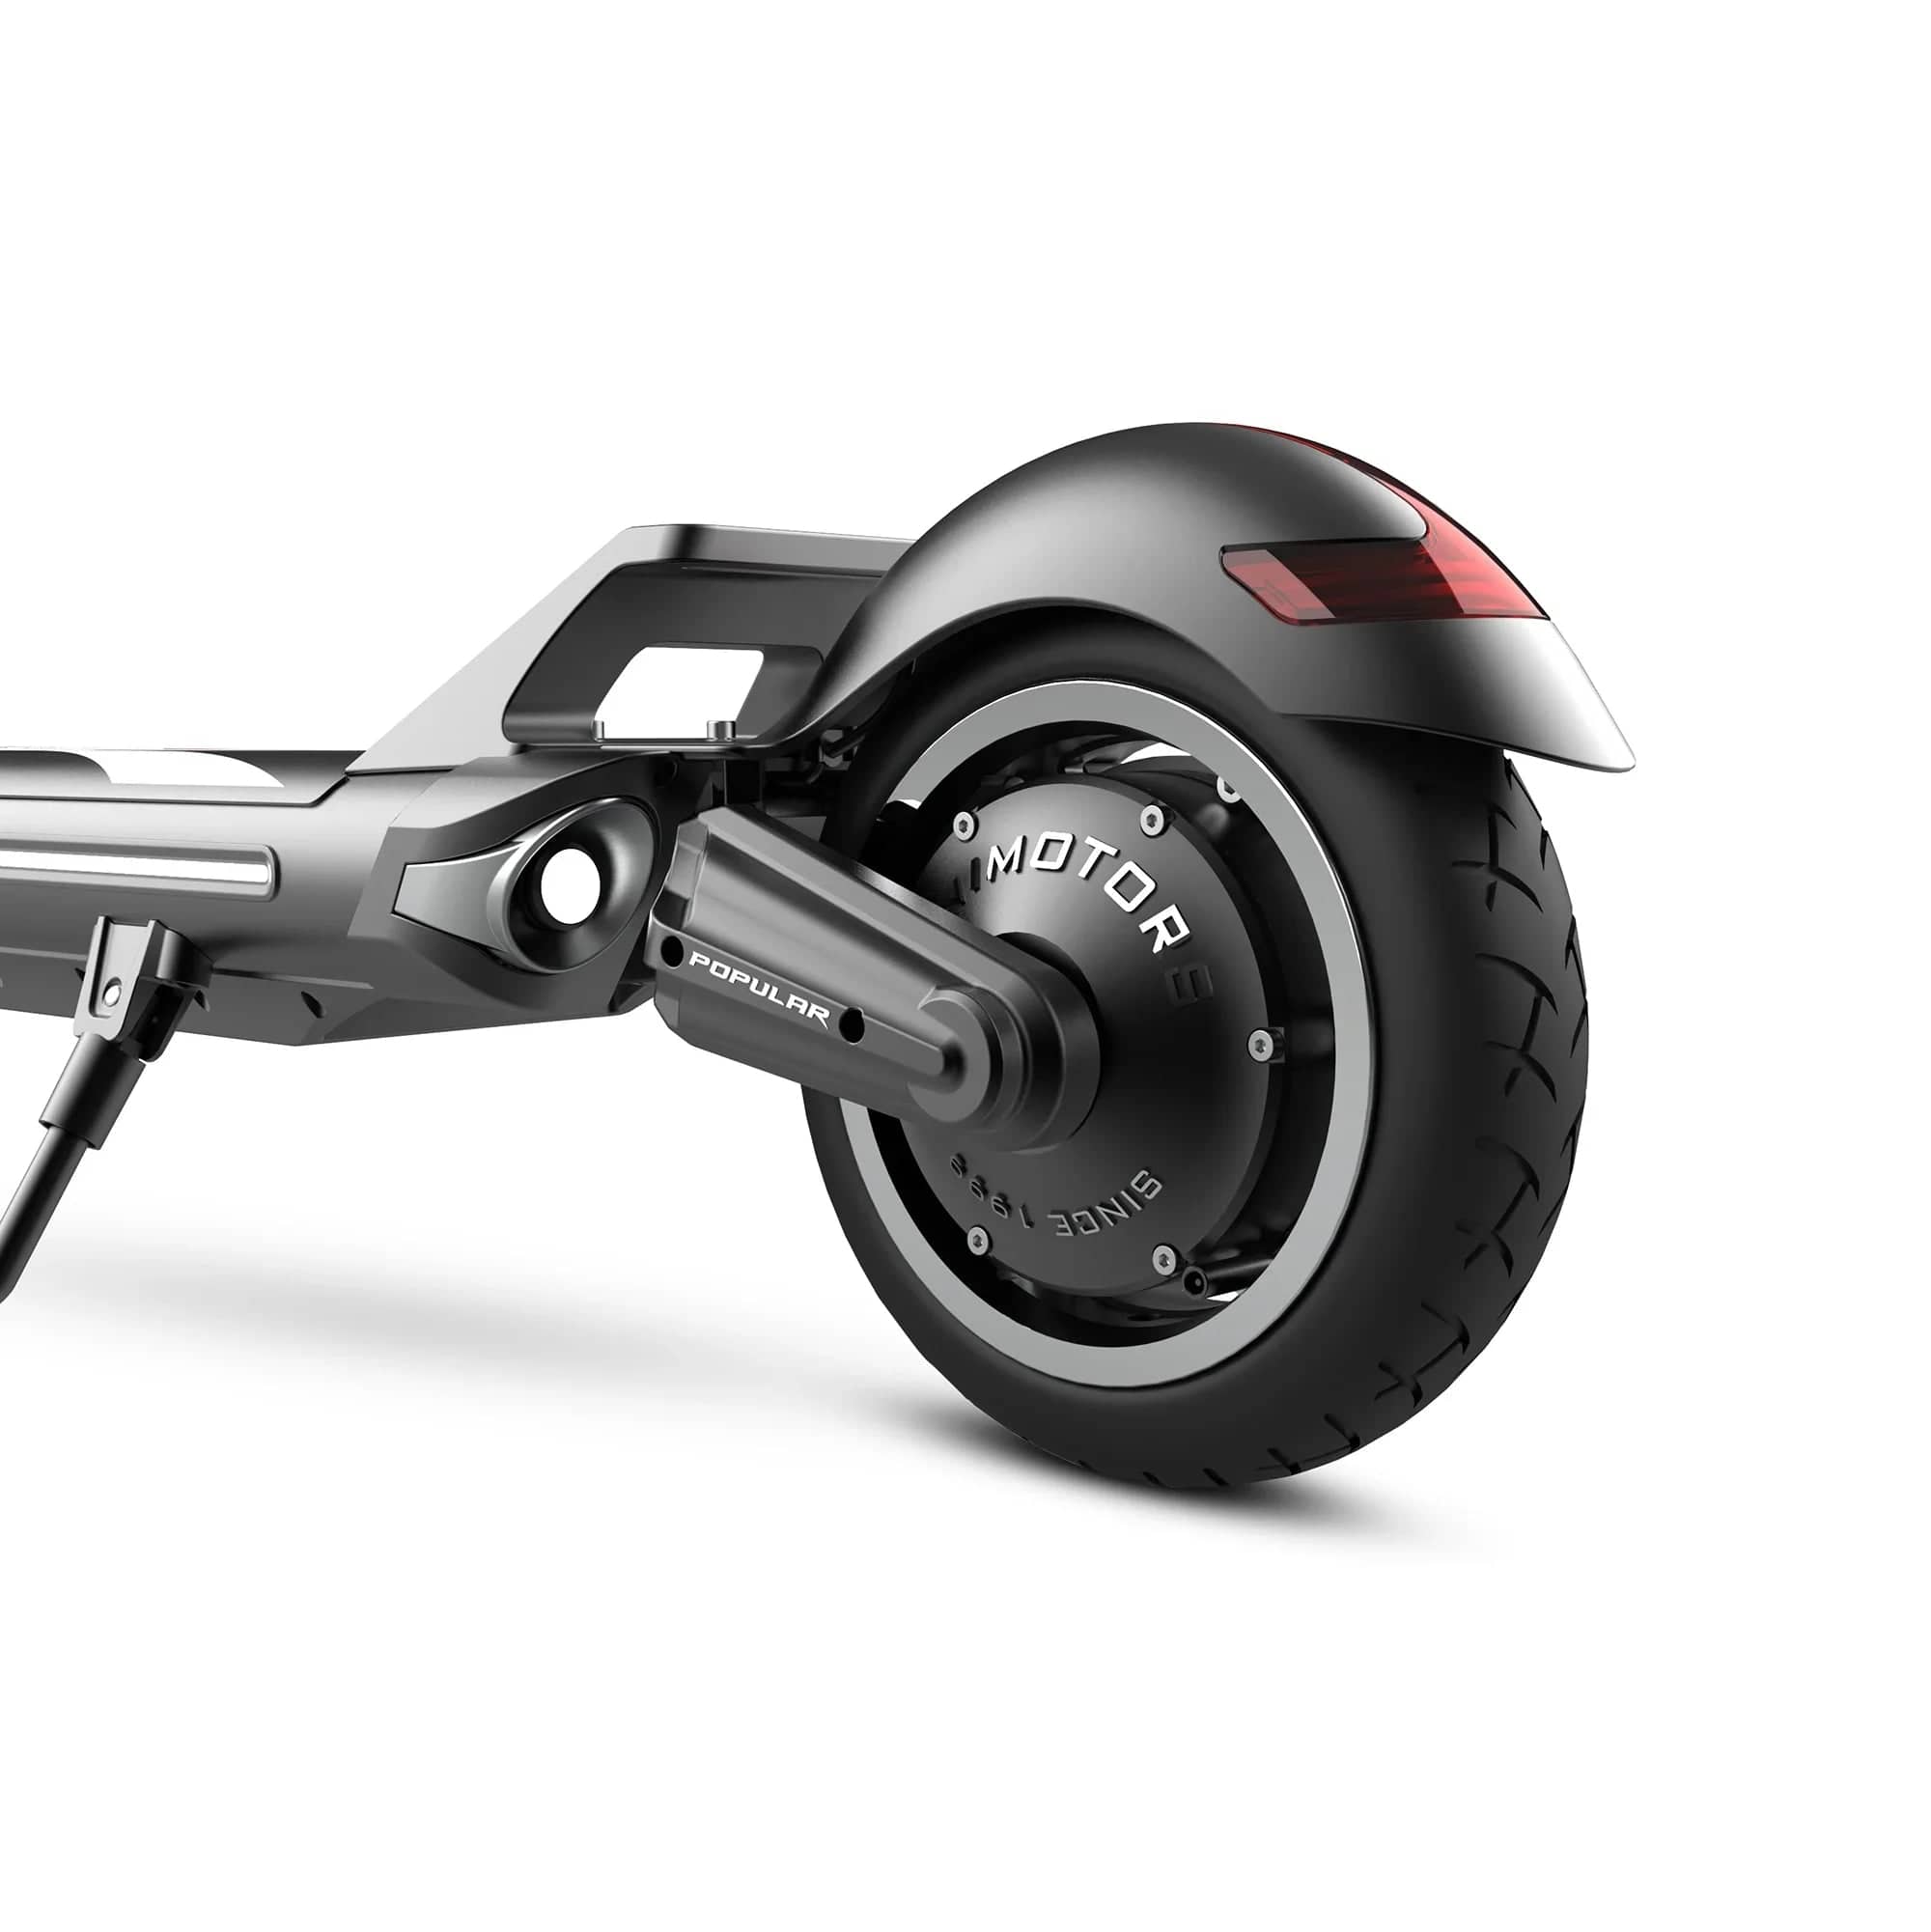 Dualtron Victor Electric Scooter - Minimotors USA